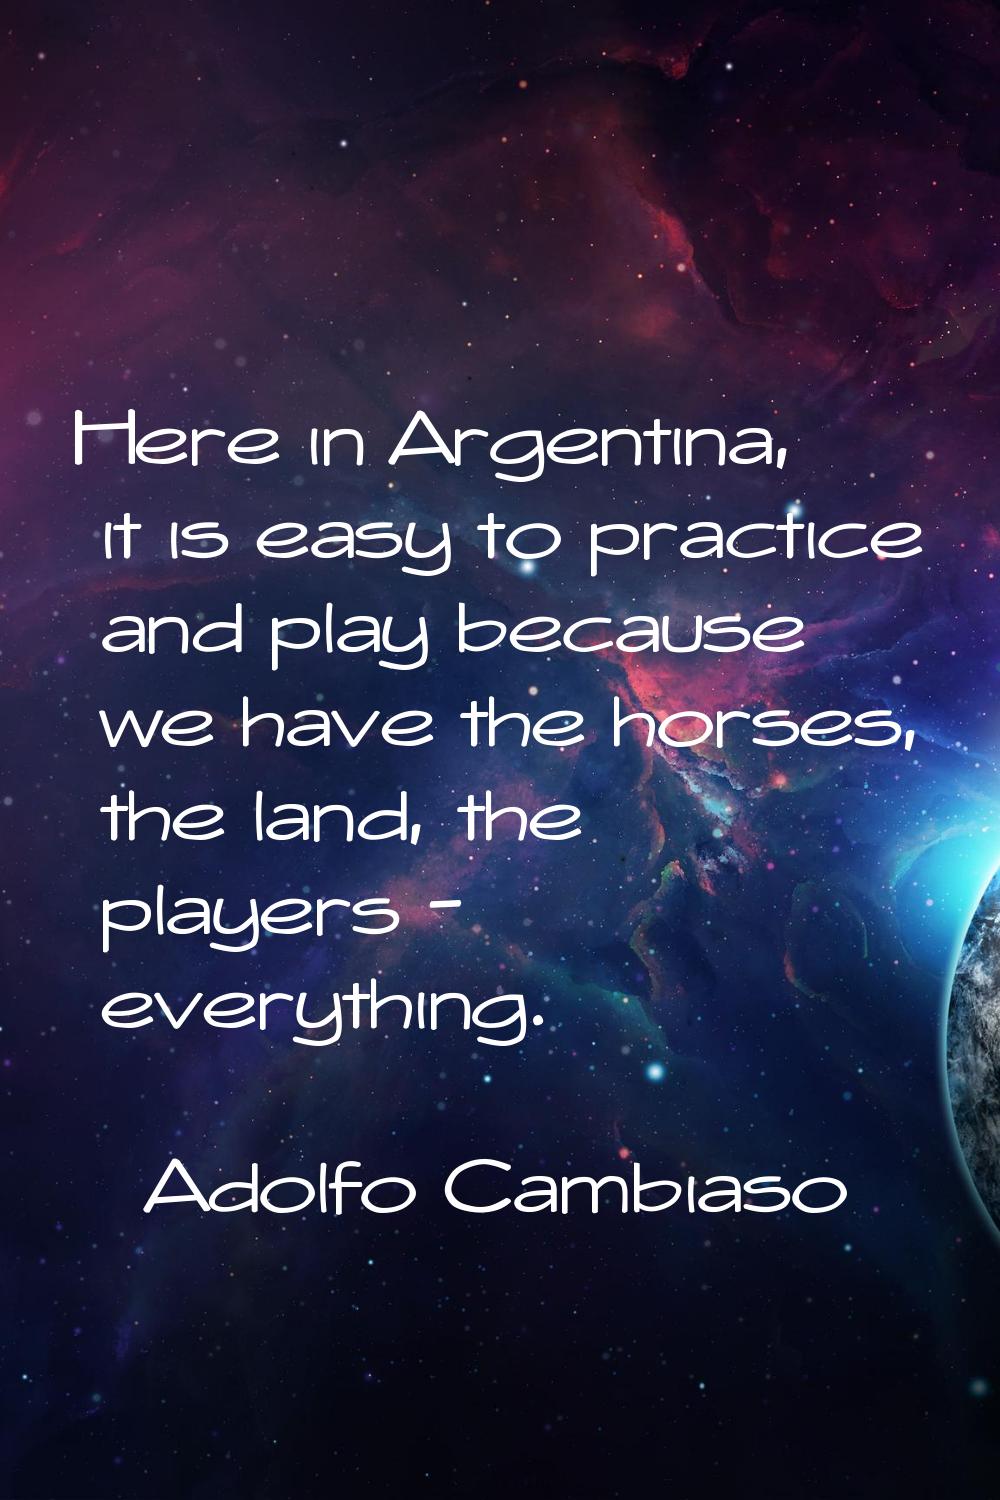 Here in Argentina, it is easy to practice and play because we have the horses, the land, the player